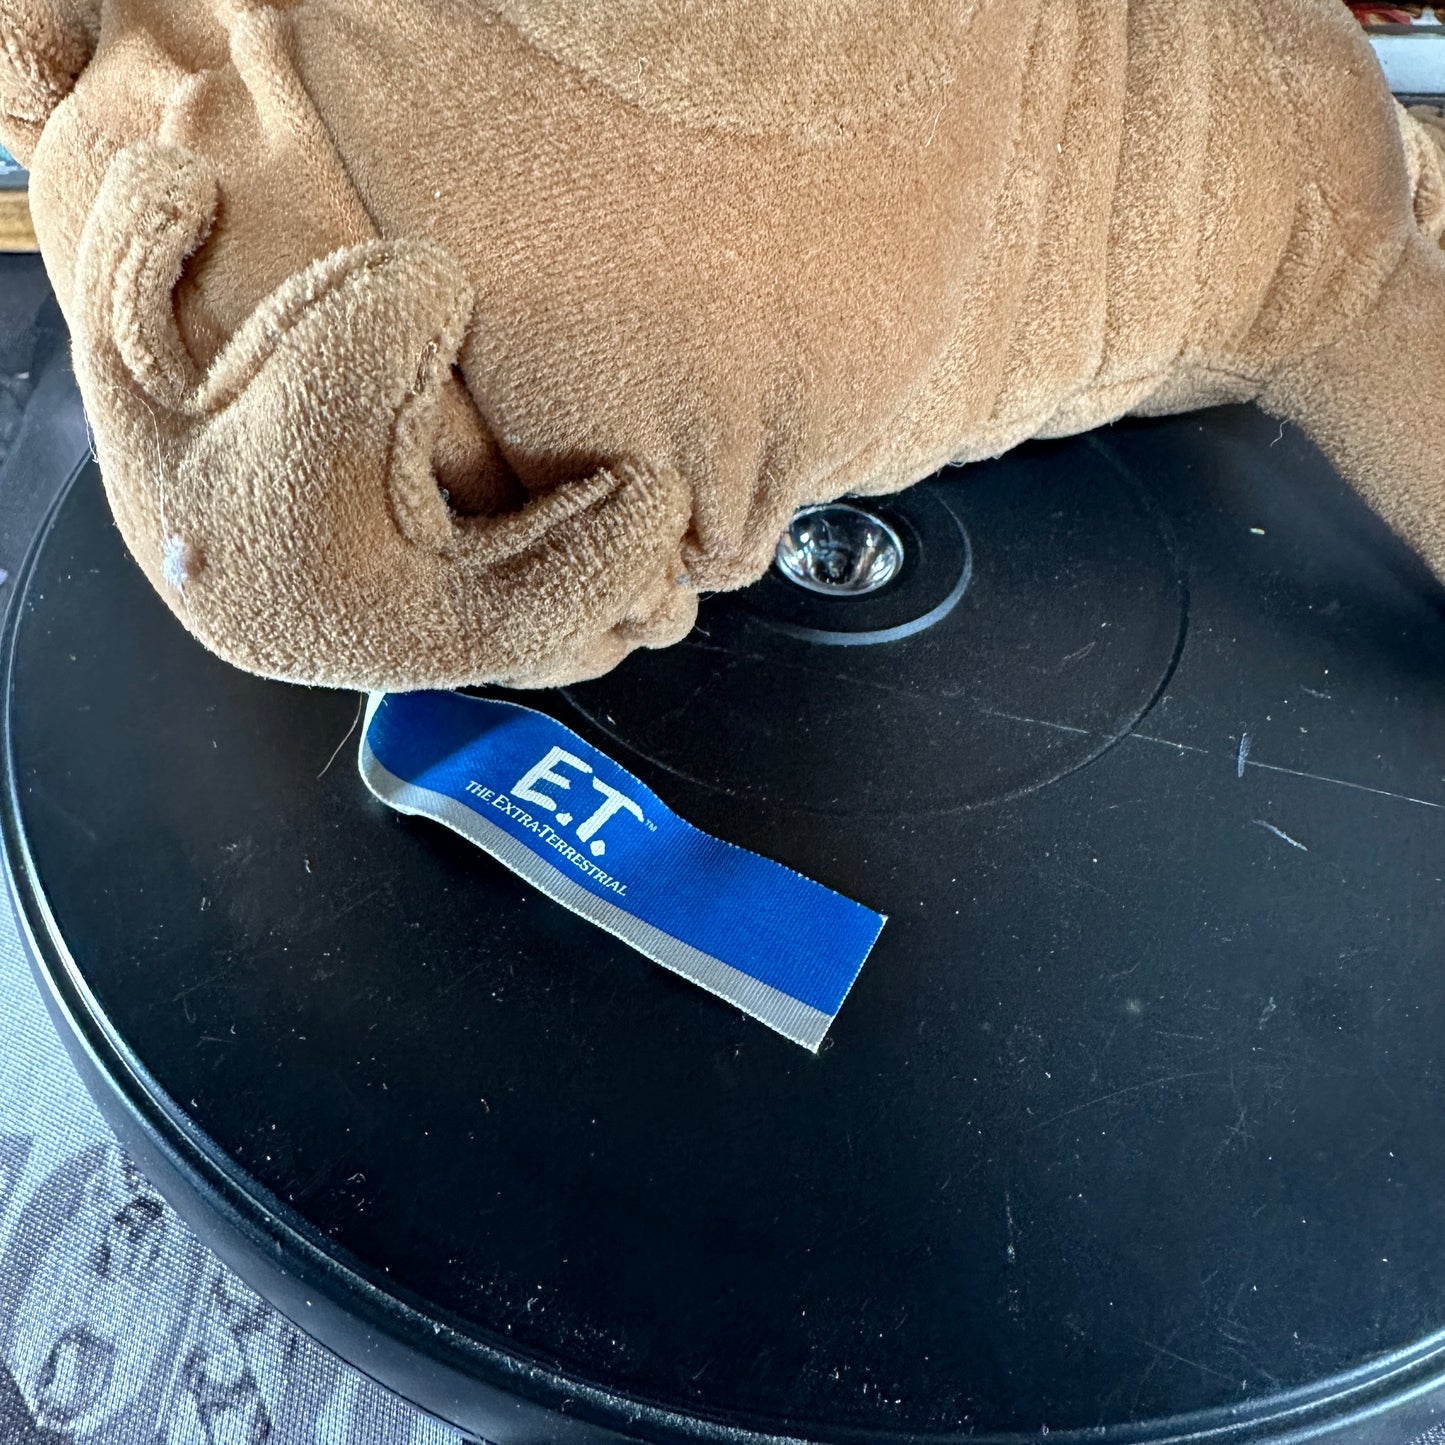 ET The Extra Terrestrial Toys R Us Exclusive 20th Anniversary 12" Plush Pose-able